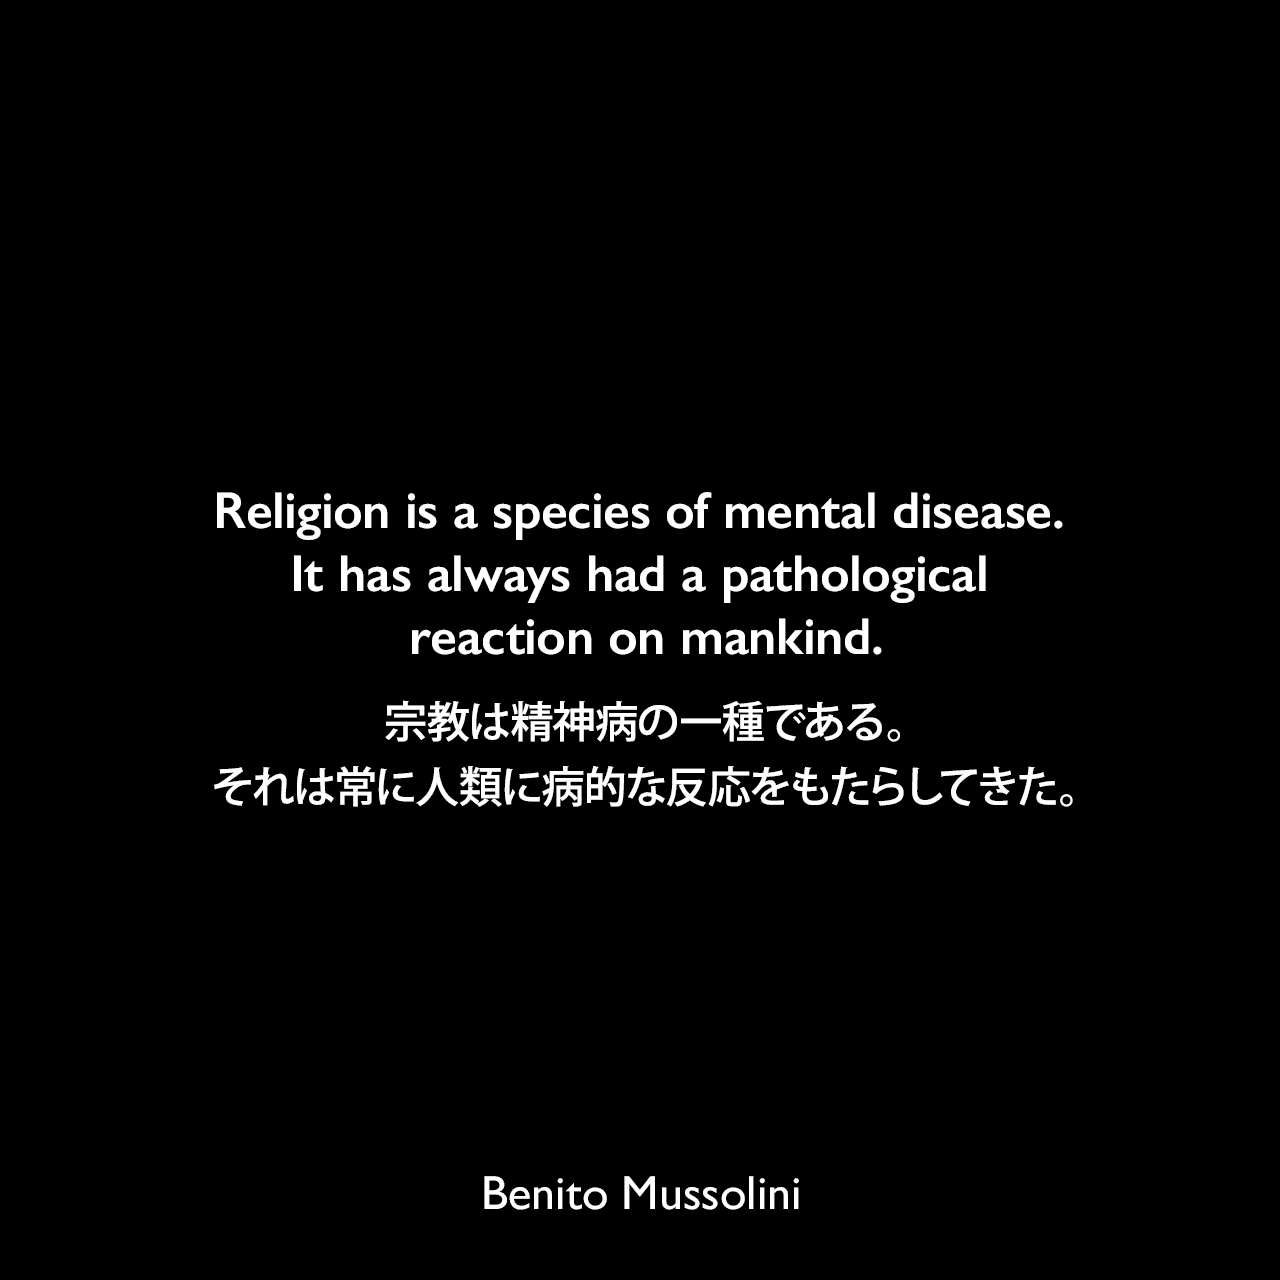 Religion is a species of mental disease. It has always had a pathological reaction on mankind.宗教は精神病の一種である。それは常に人類に病的な反応をもたらしてきた。- 1904年7月のローザンヌでの演説よりBenito Mussolini